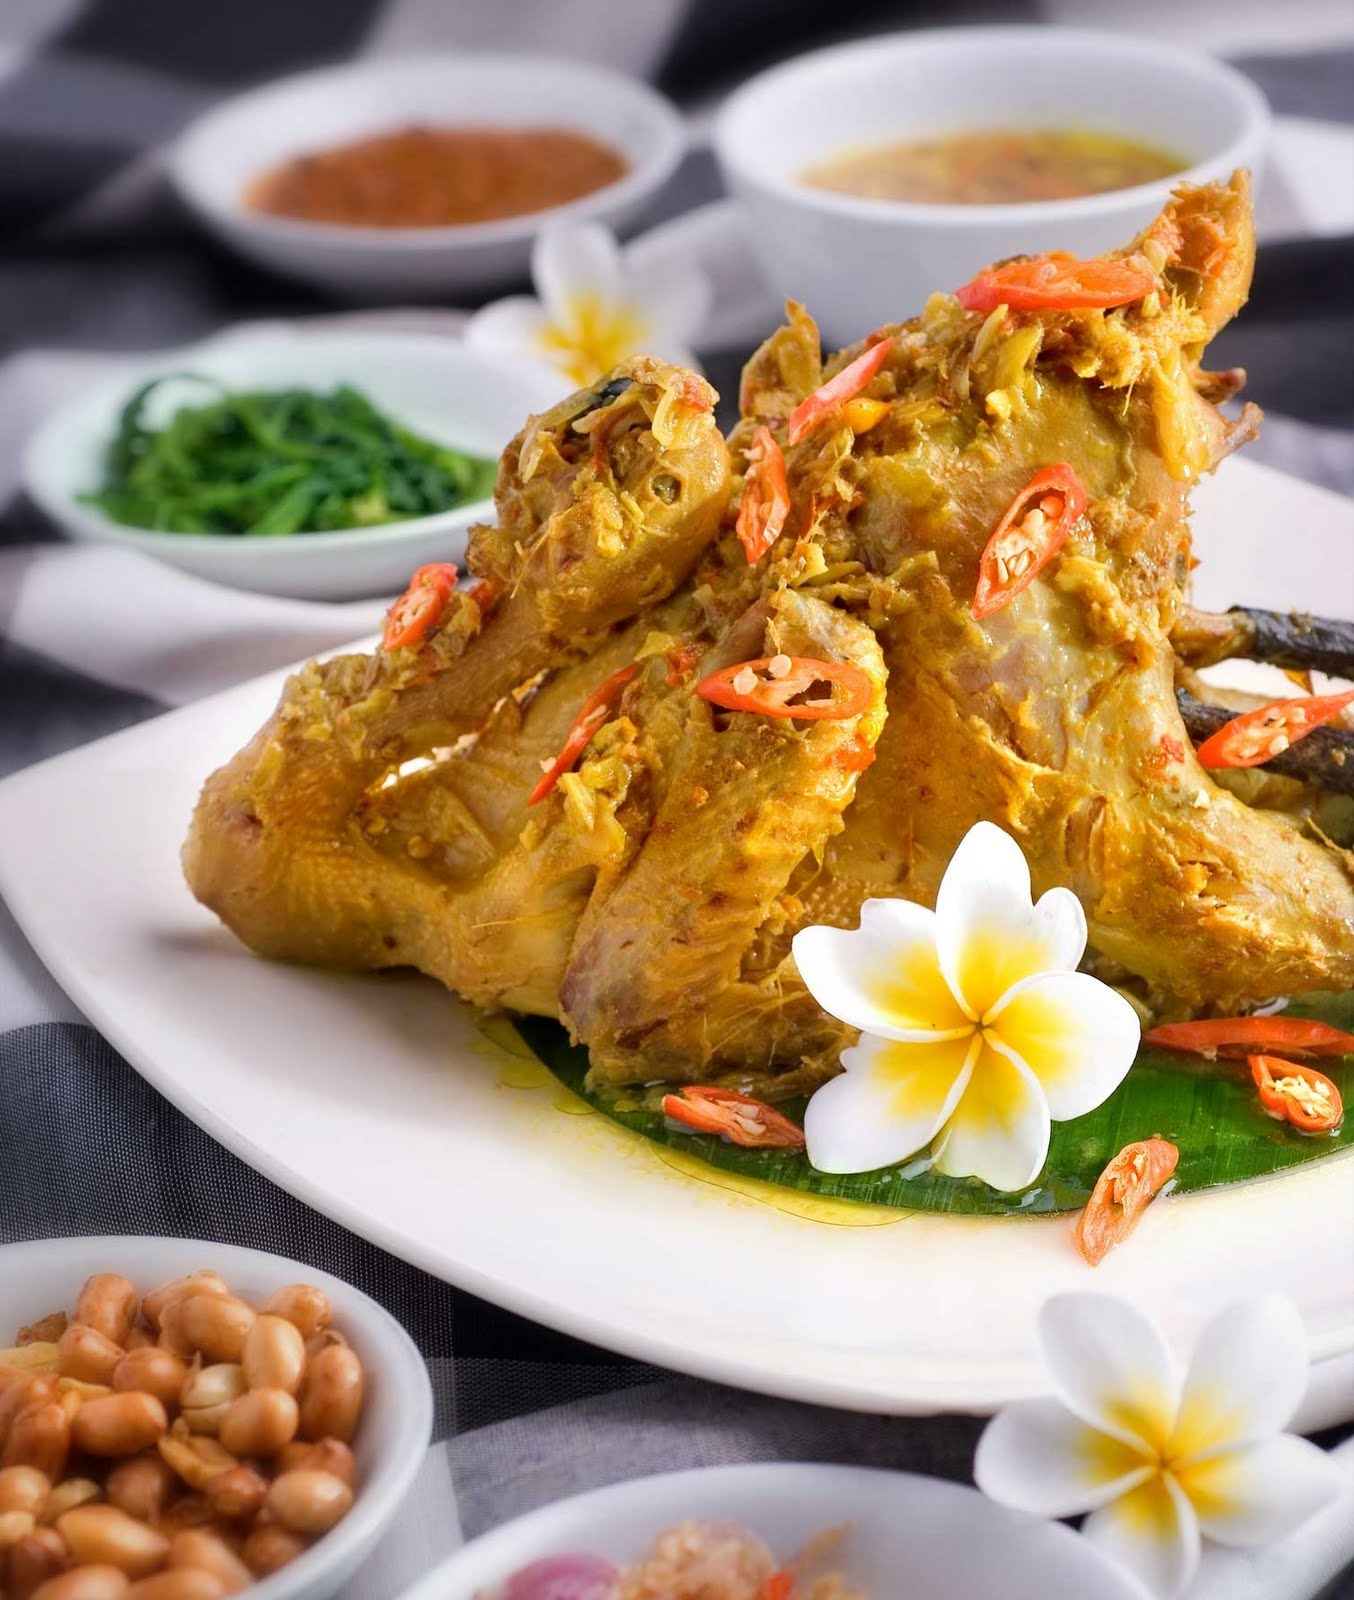 Betutu Chicken | Cultures of Denpasar | Learn and recognize about ...